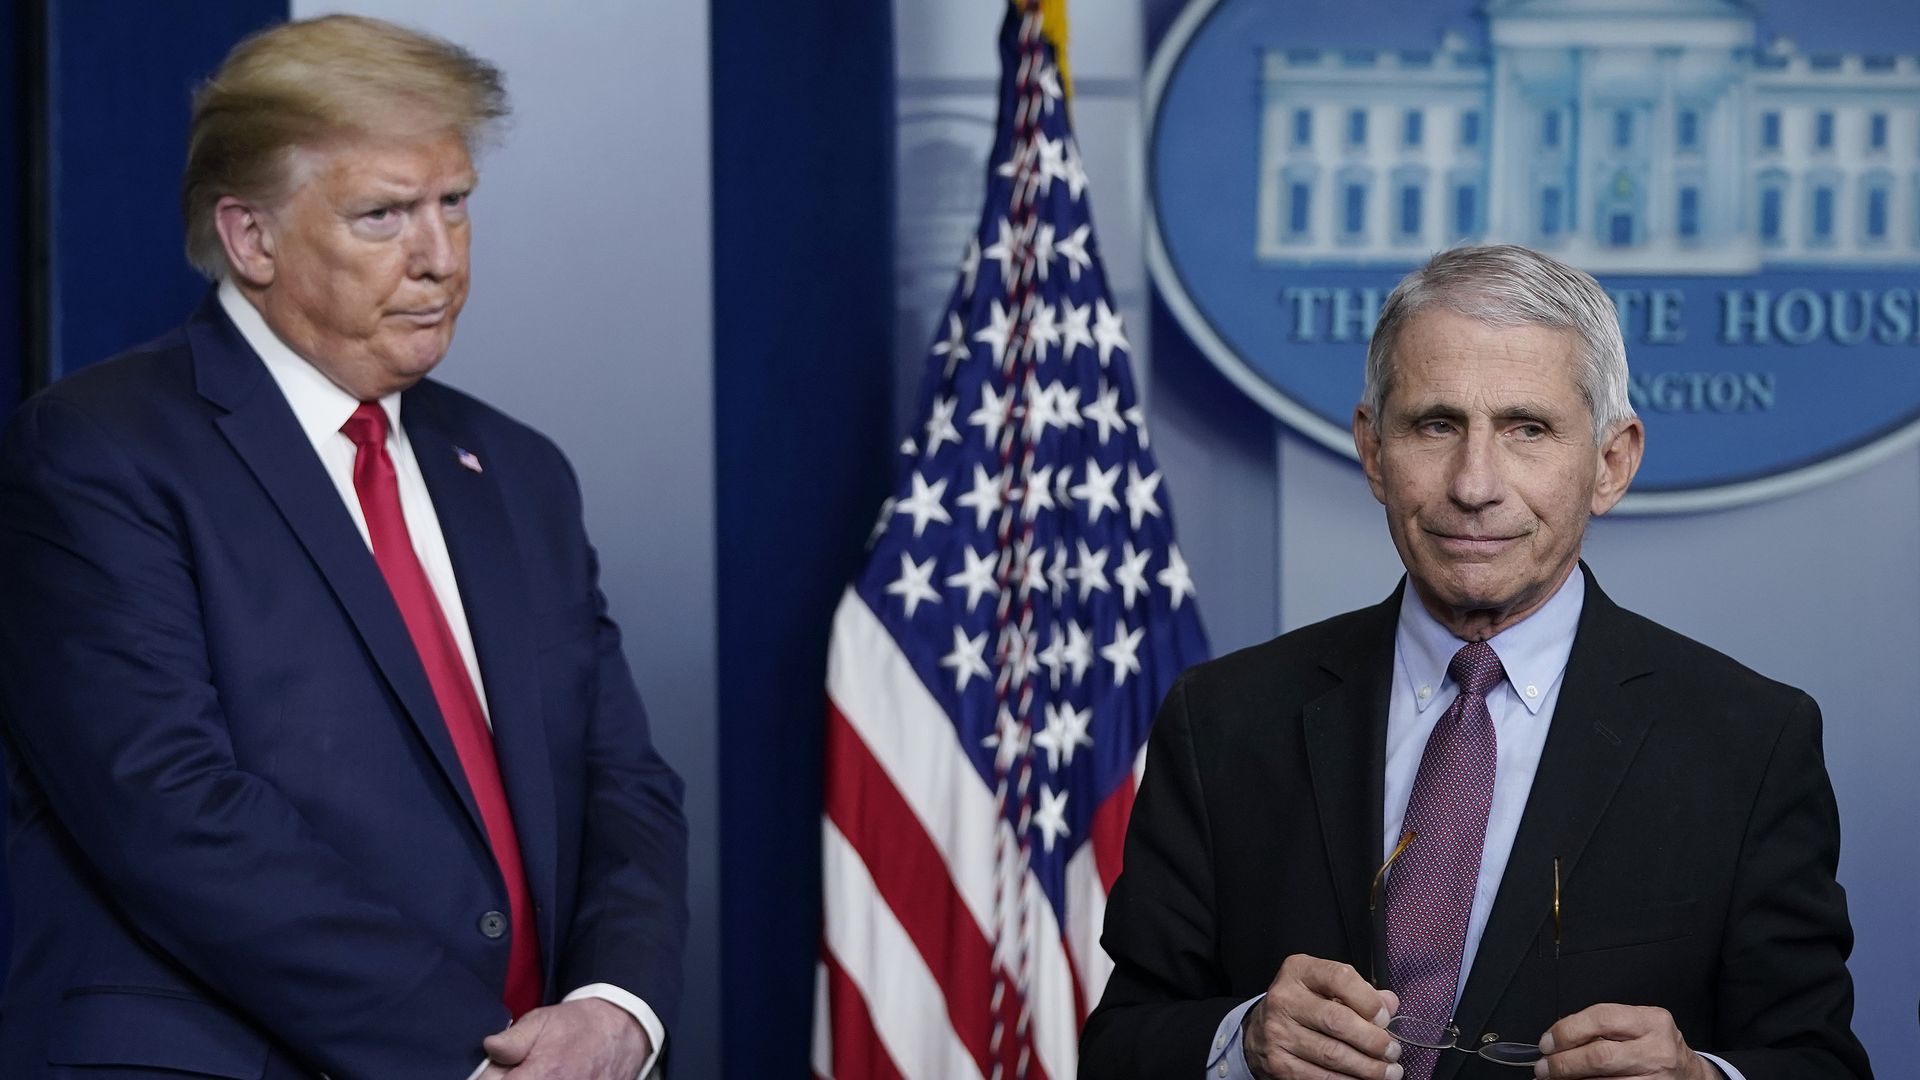  Dr. Anthony Fauci and U.S. President Donald Trump participate in the daily coronavirus task force briefing at the White House on April 22, 2020 in Washington, DC.